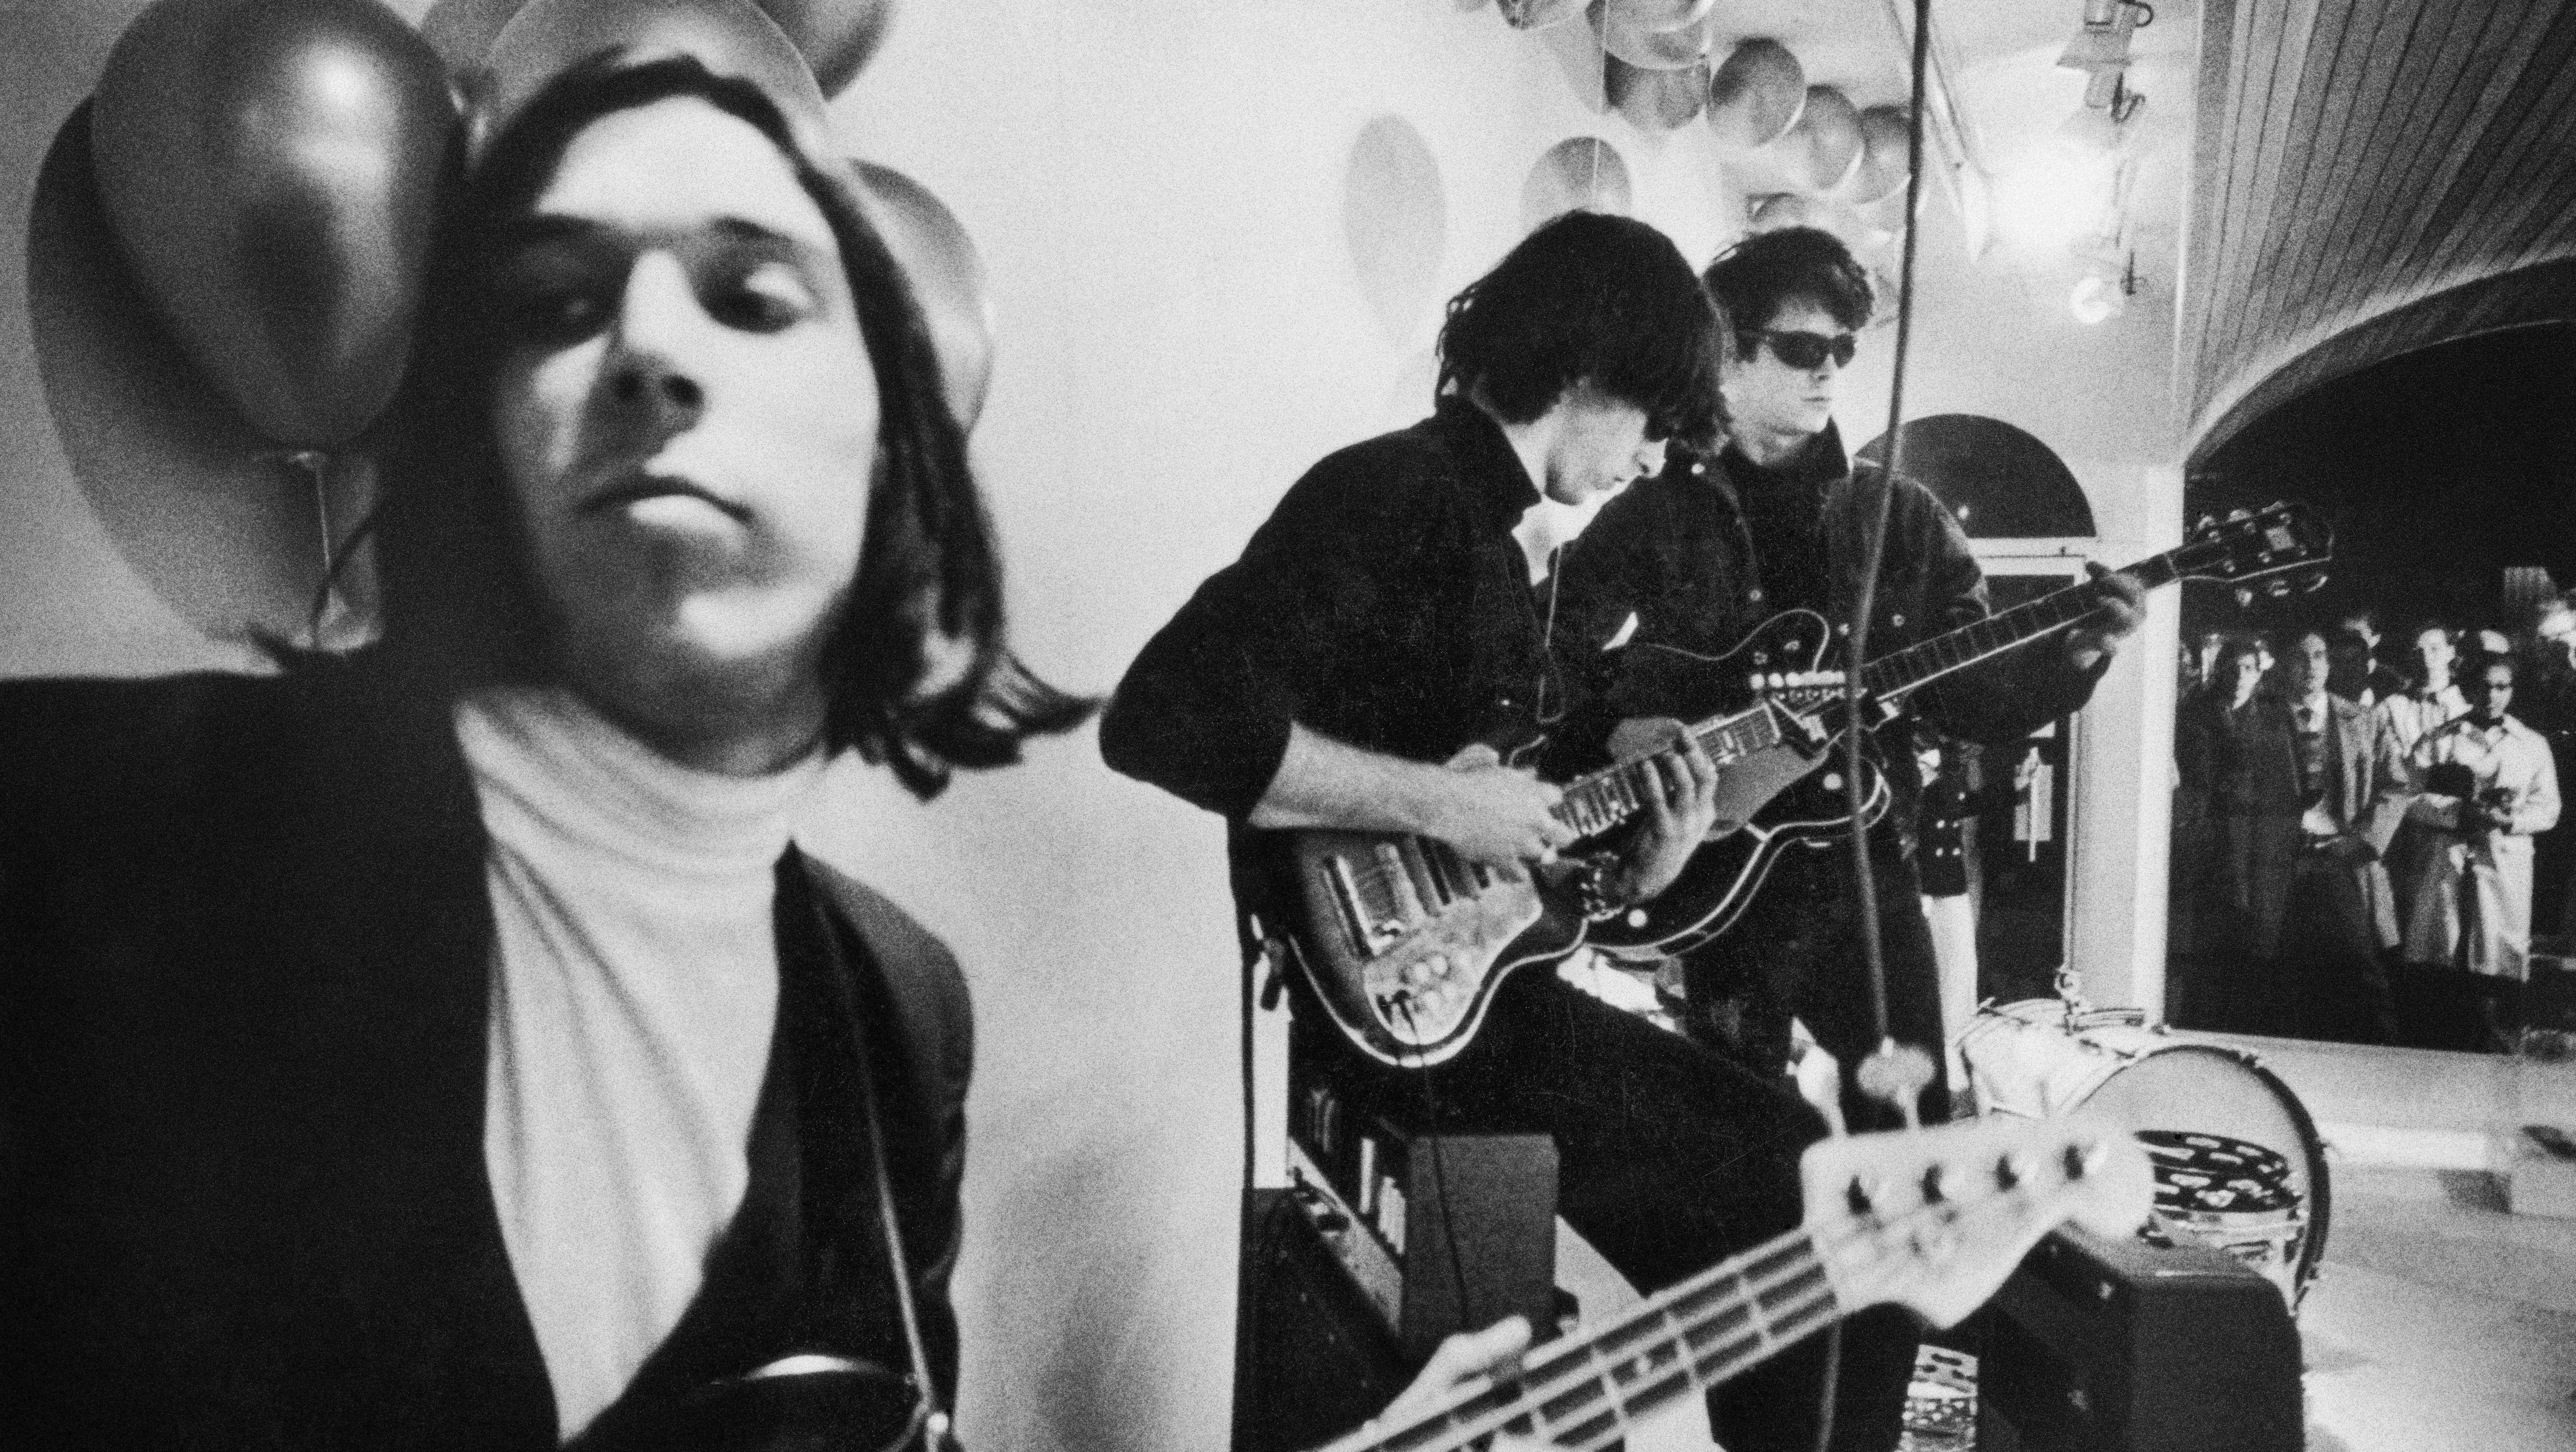 The Velvet Underground documentary is here to chart the rock band’s rise